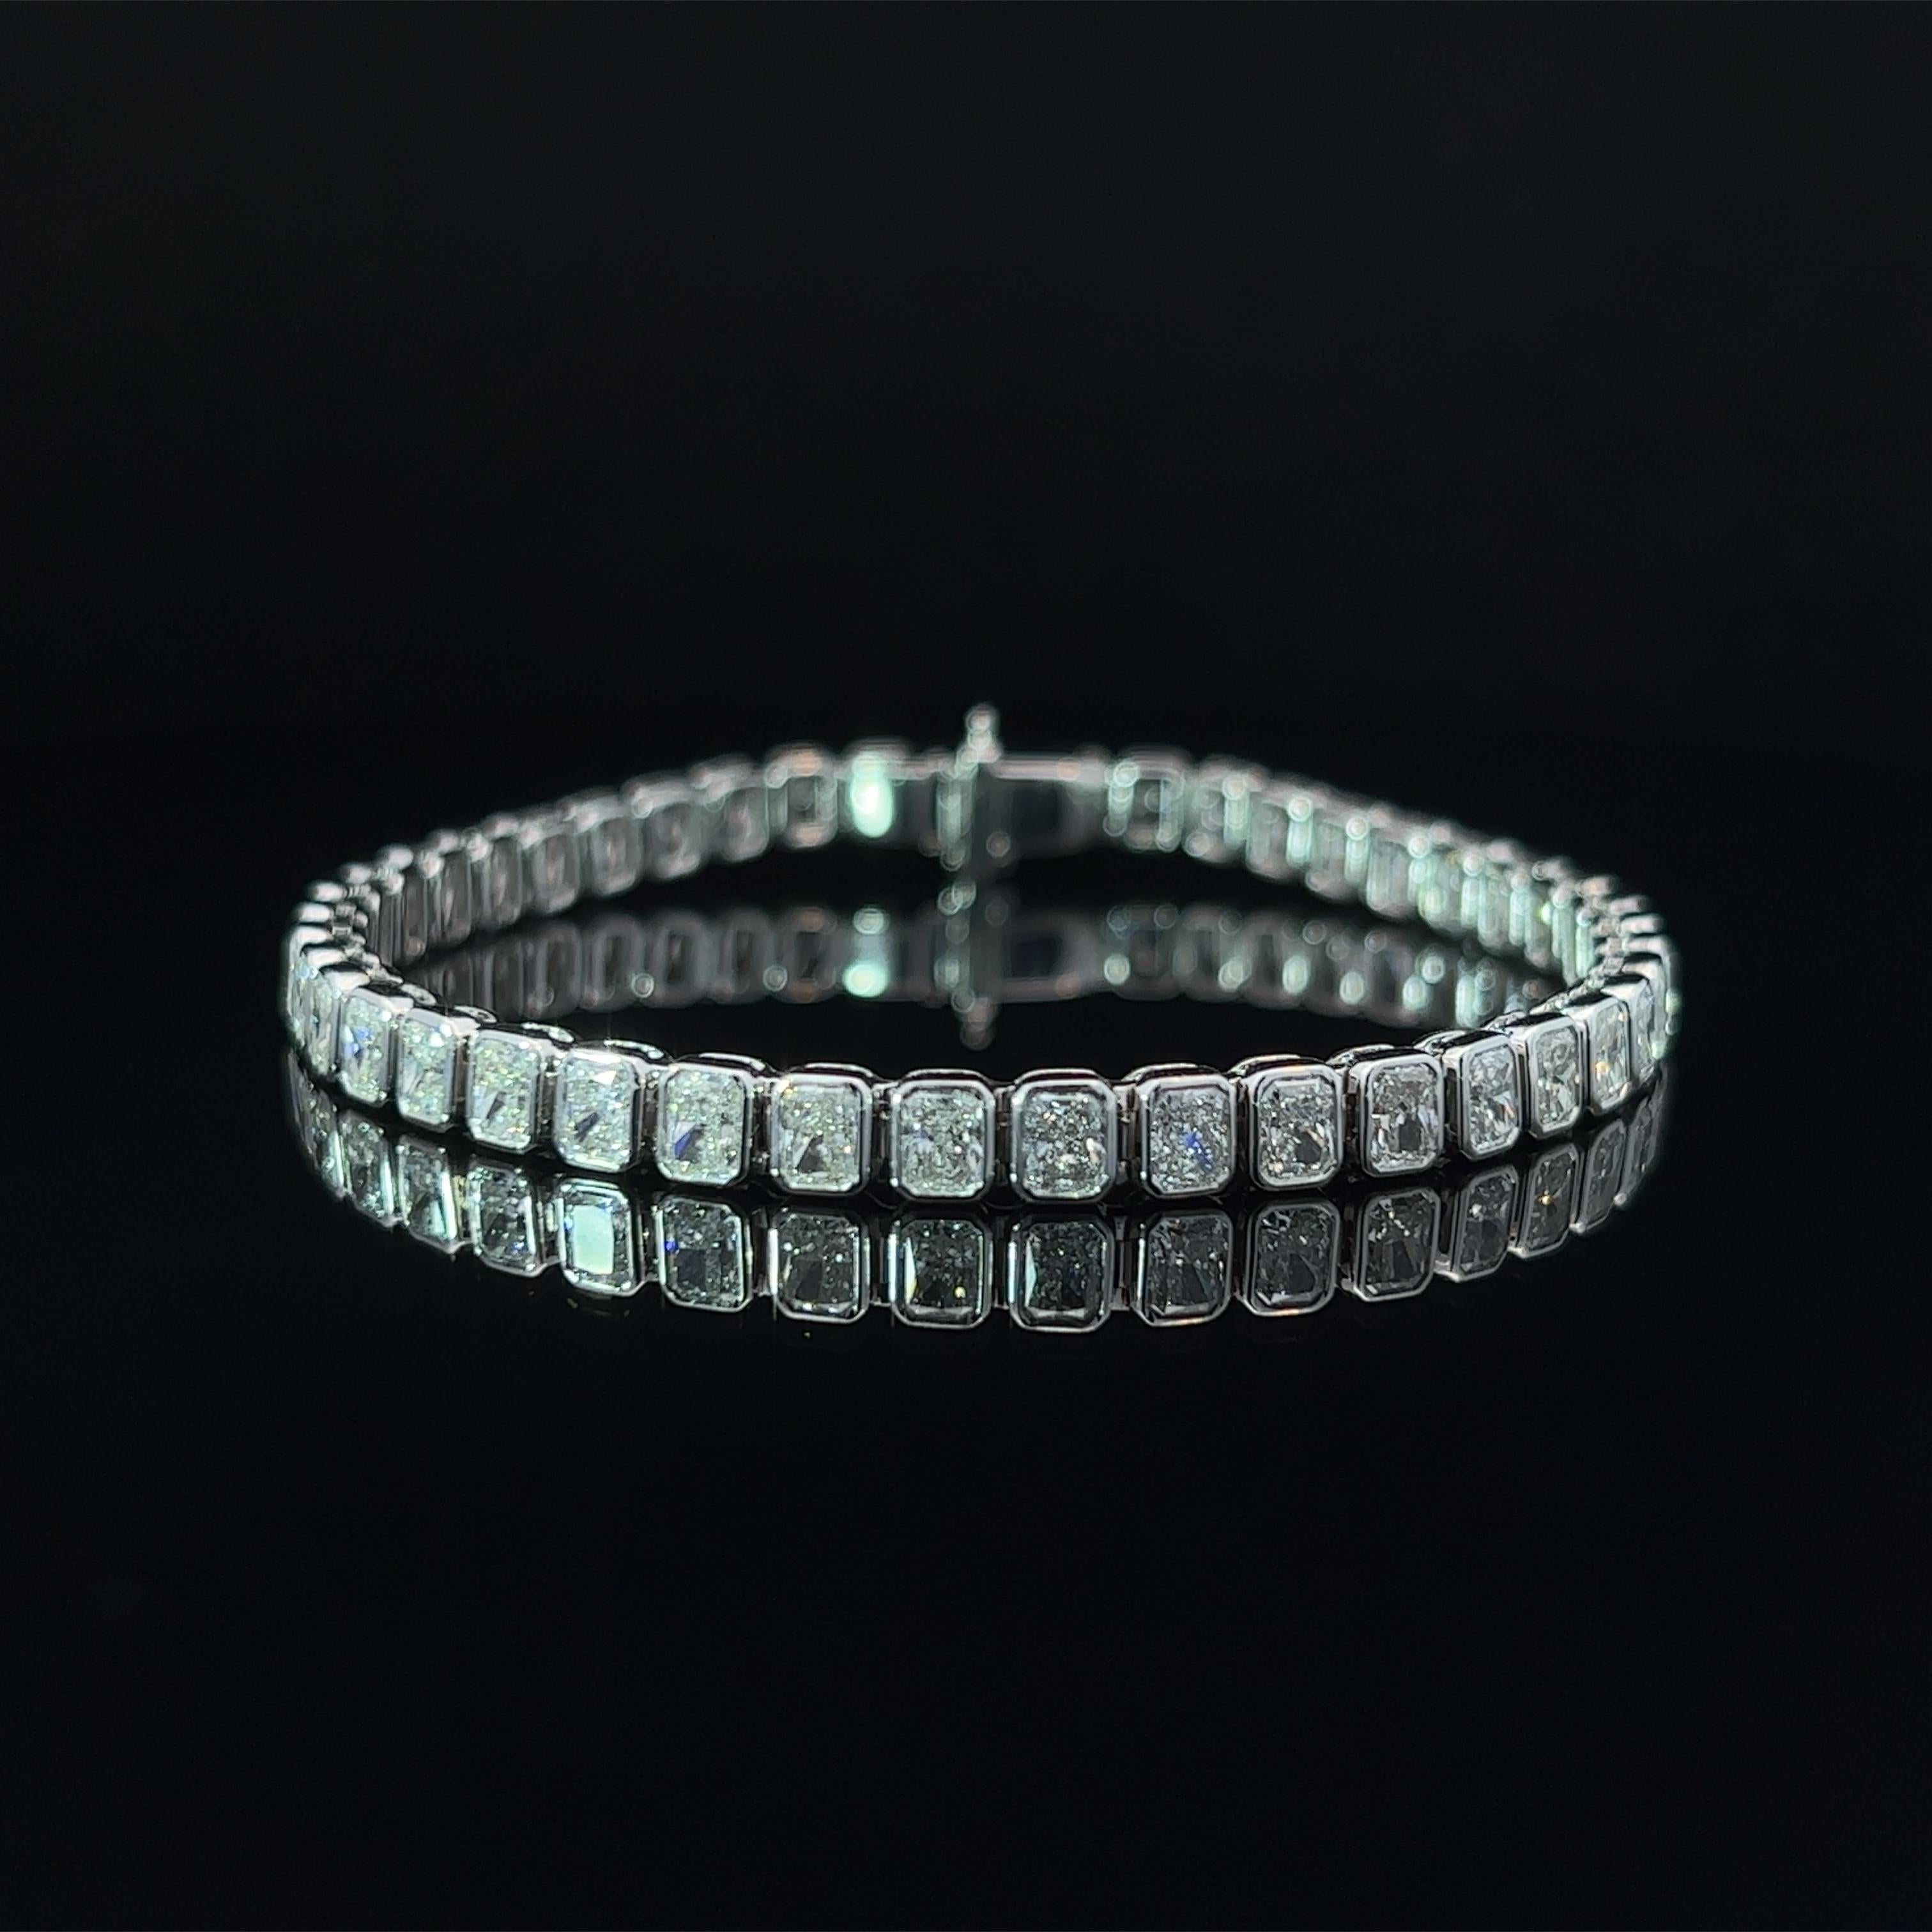 Diamond Shape: Radiant Cut 
Total Diamond Weight: 8.35ct
Individual Diamond Weight: .20ct
Color/Clarity: GH VVS  
Metal: 18K White Gold  
Metal Weight: 16.75g 

Key Features:

Radiant-Cut Diamonds: The centerpiece of this bracelet showcases a